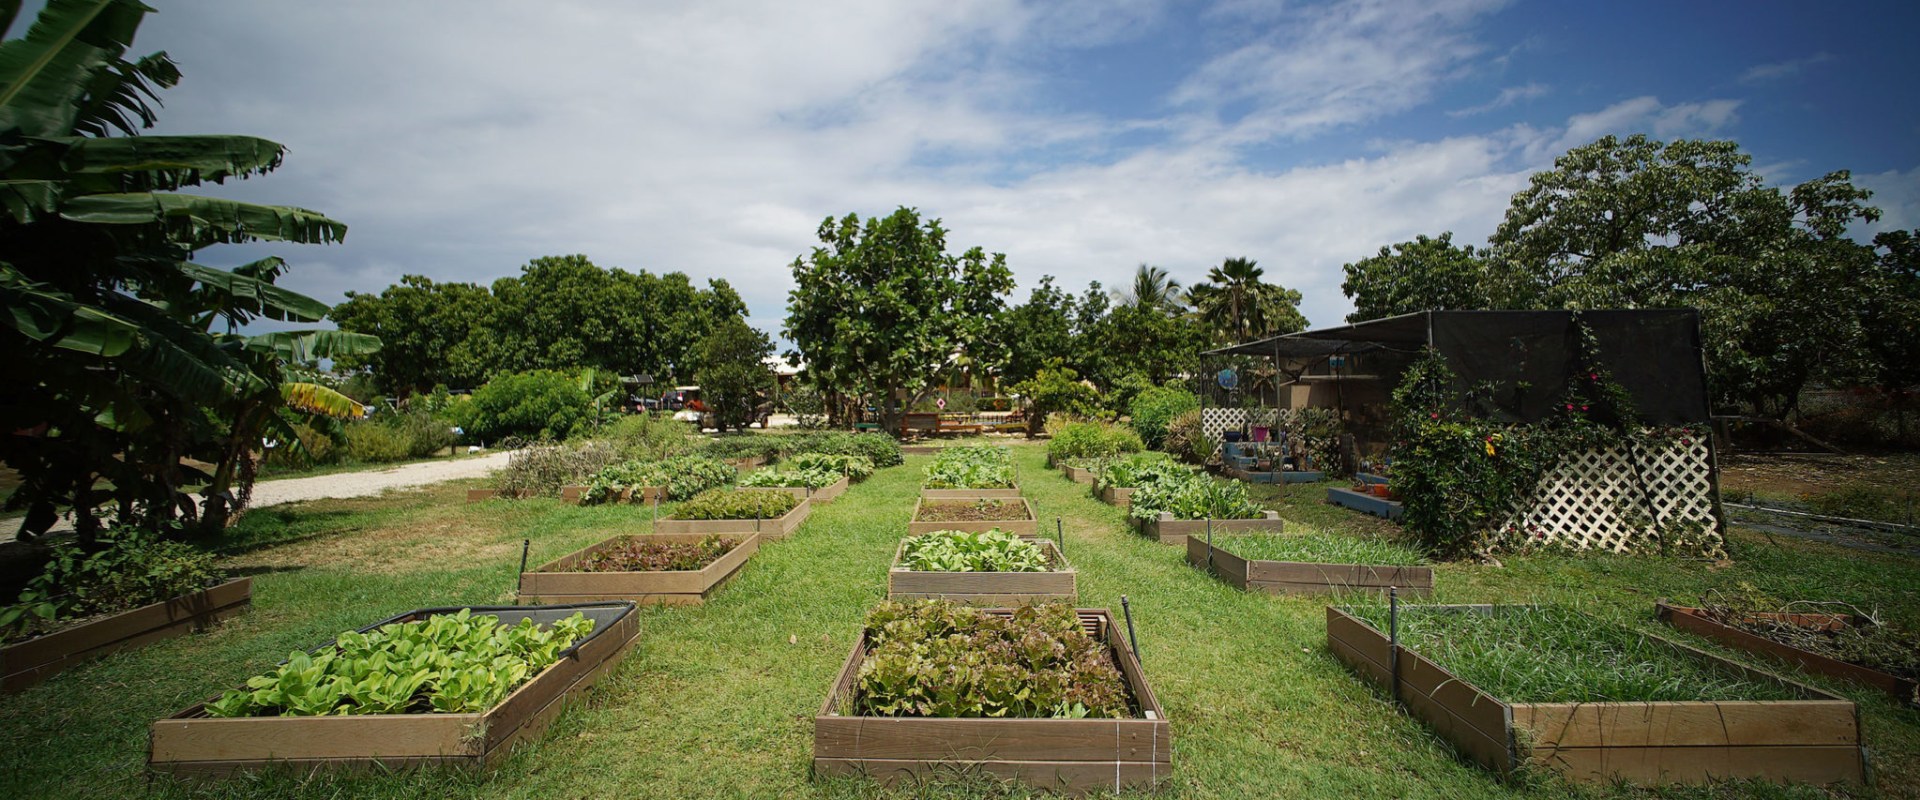 Promoting Sustainable Practices in Hawaii's Food System